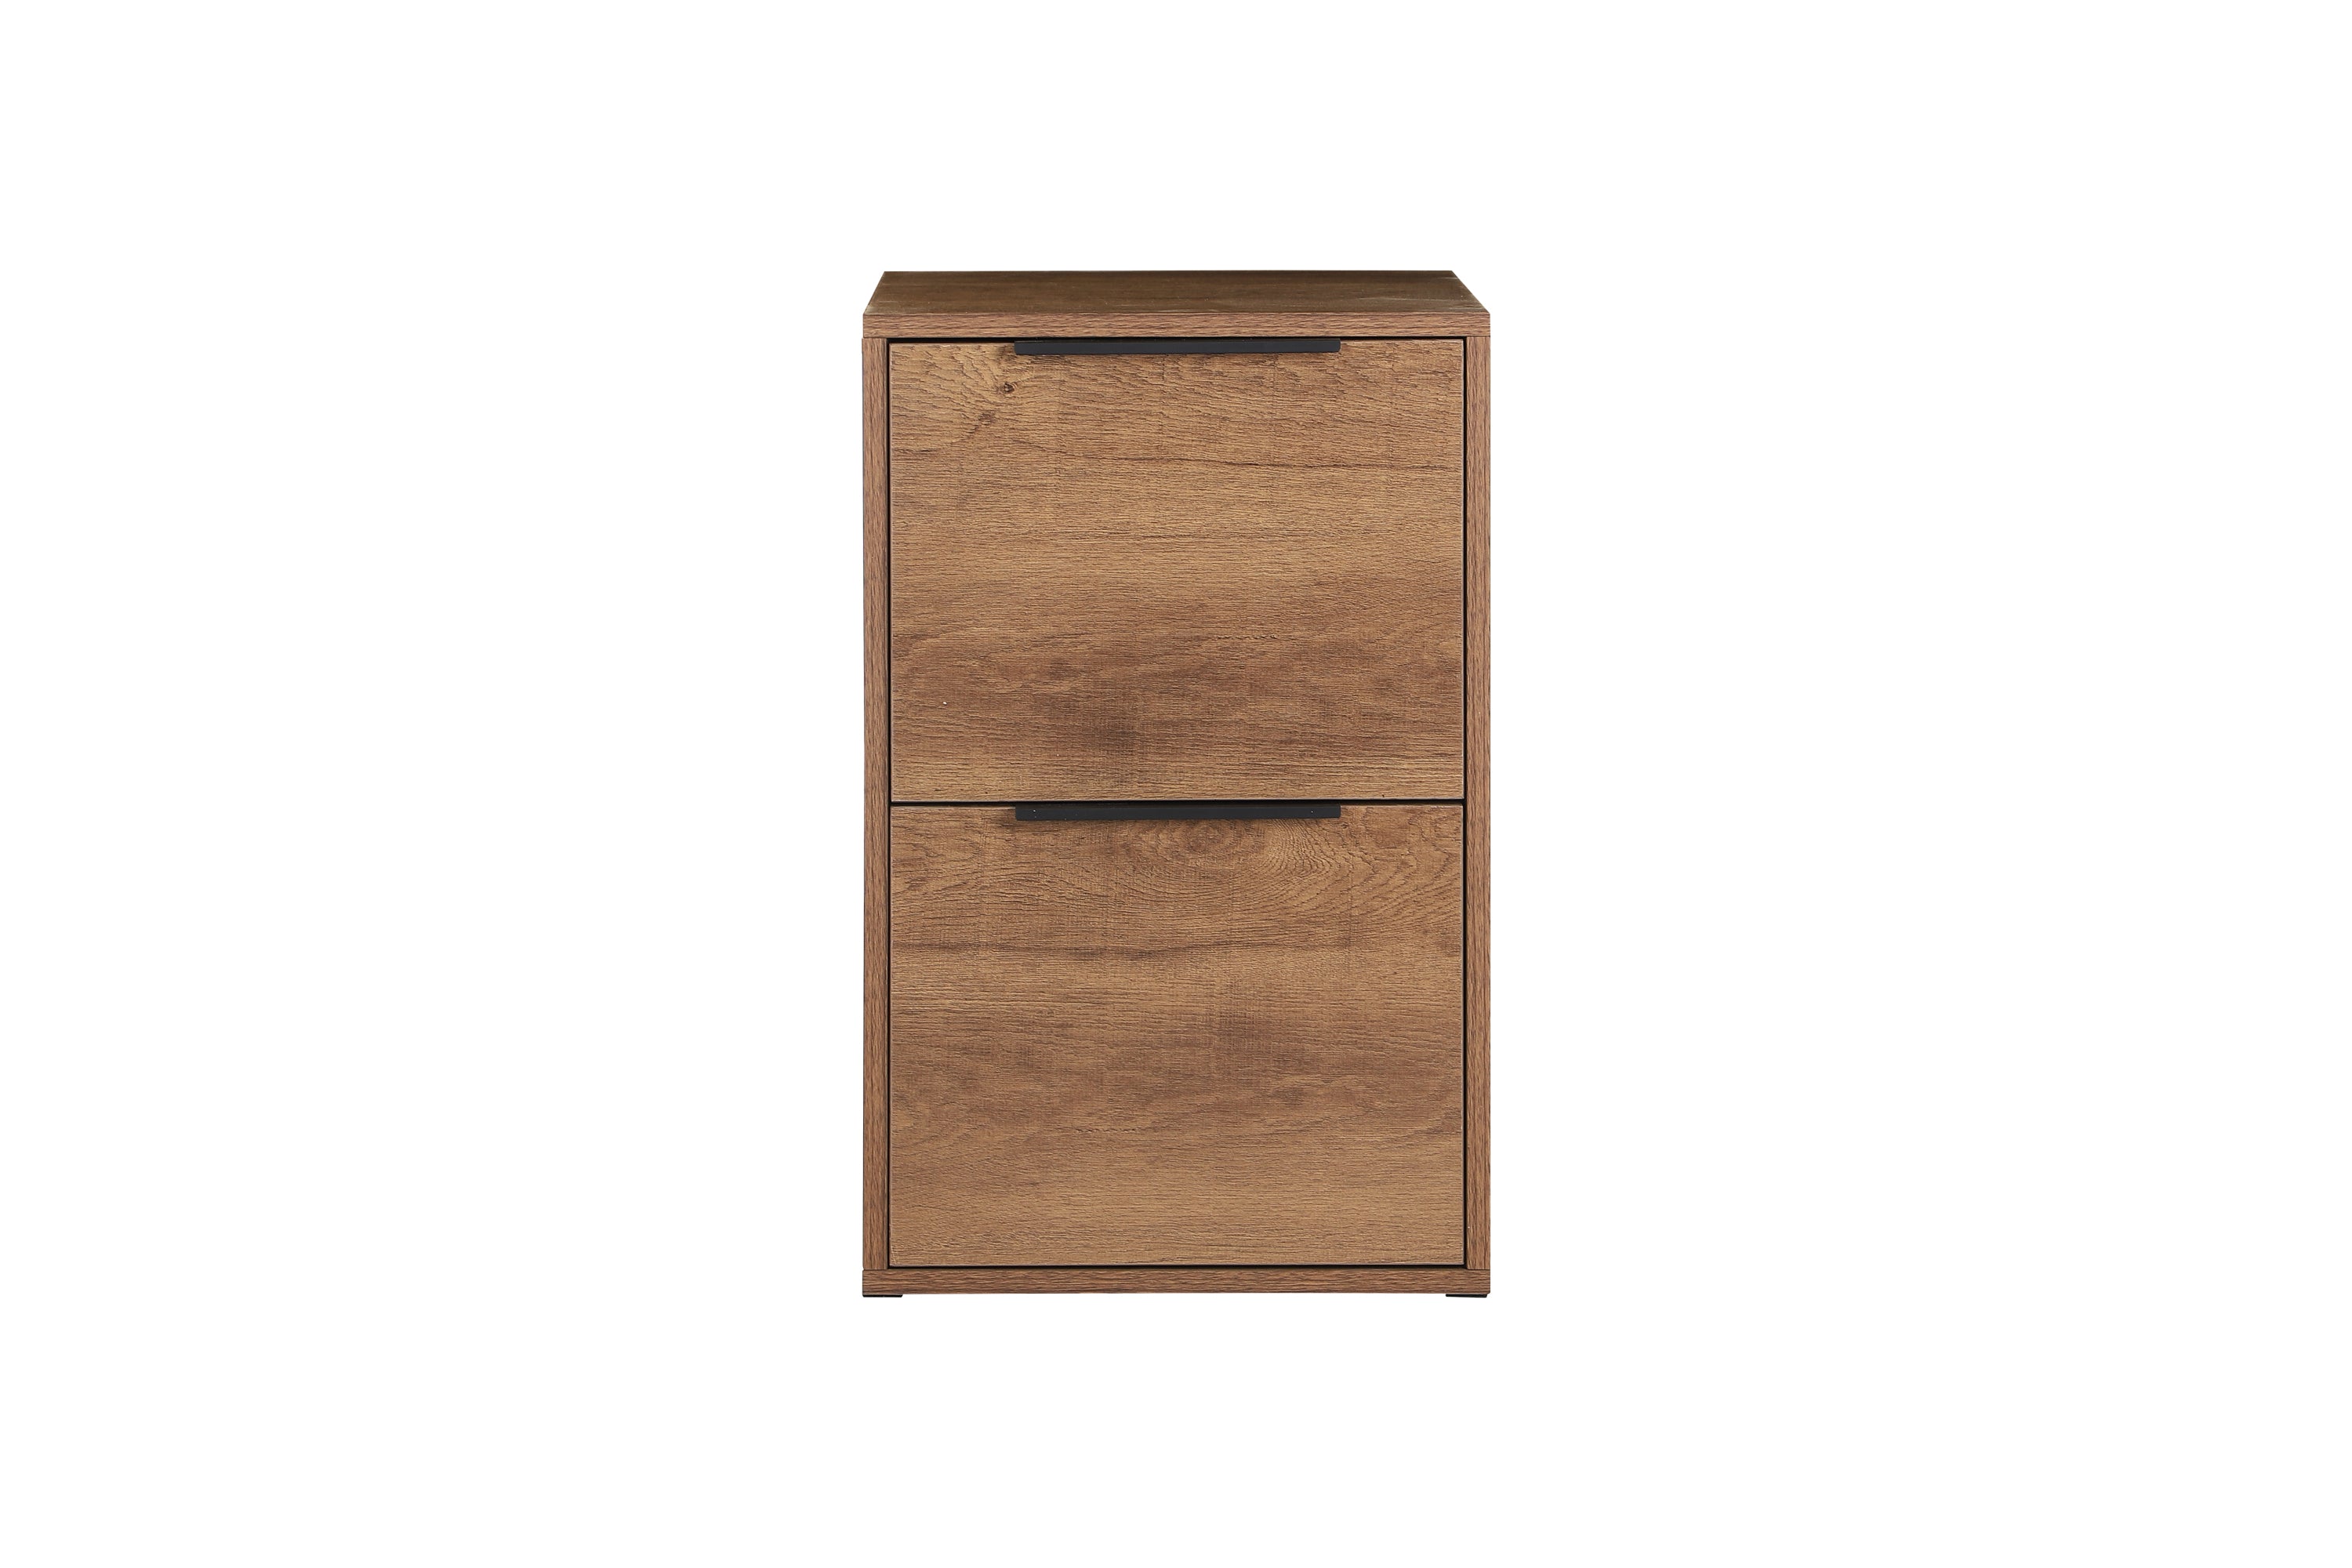 WOOD FILE CABINET WITH 2 DRAWERS VERTICAL FILLING CABINET